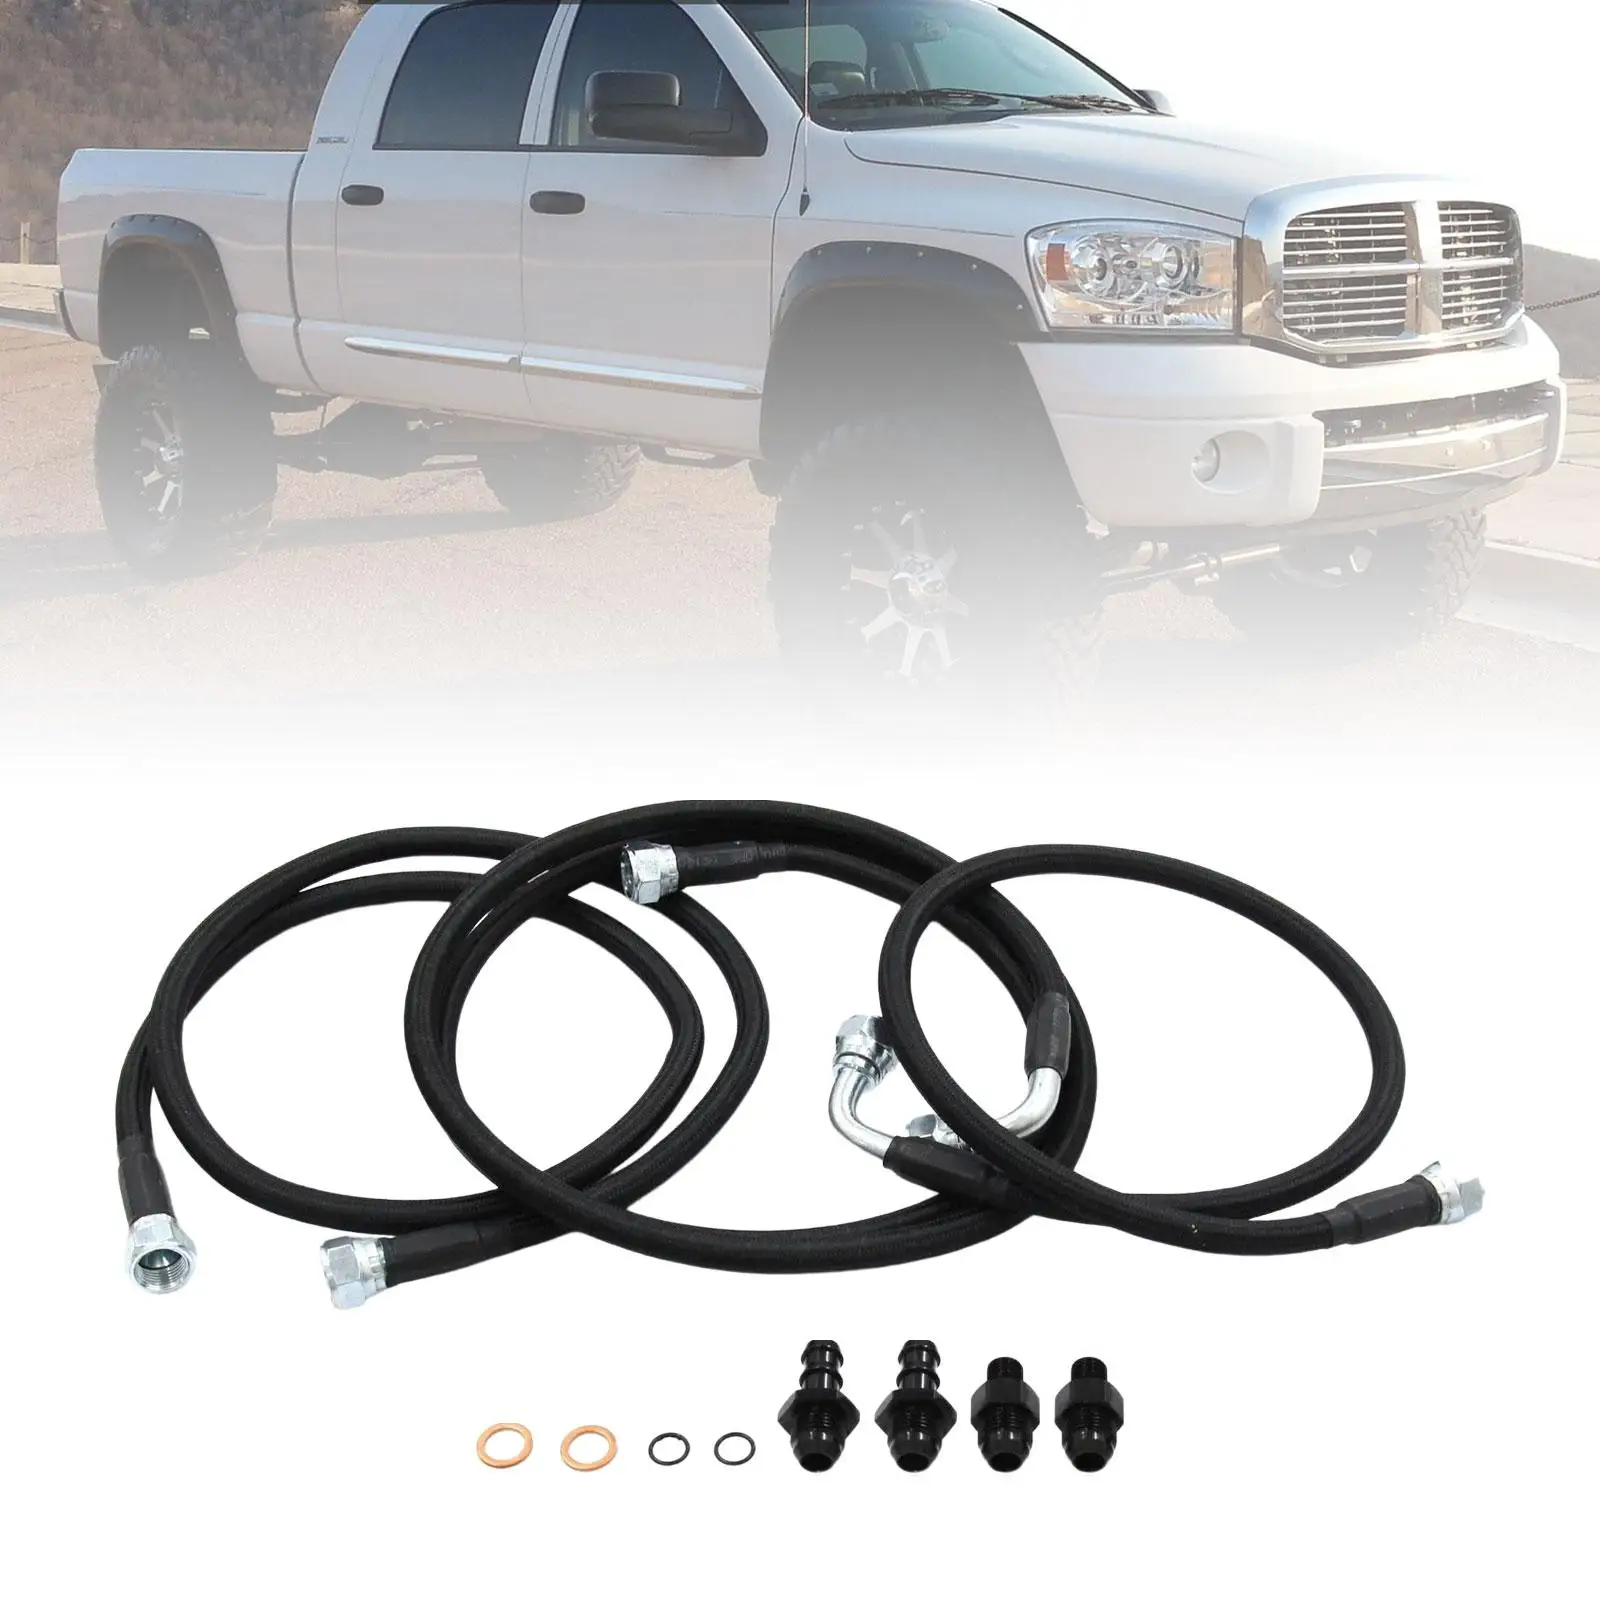 Transmission Cooler Hose Line Kit Easy to Install with Adapters Prevent Leaks Replaces Auto Parts for 48RE Transmissions